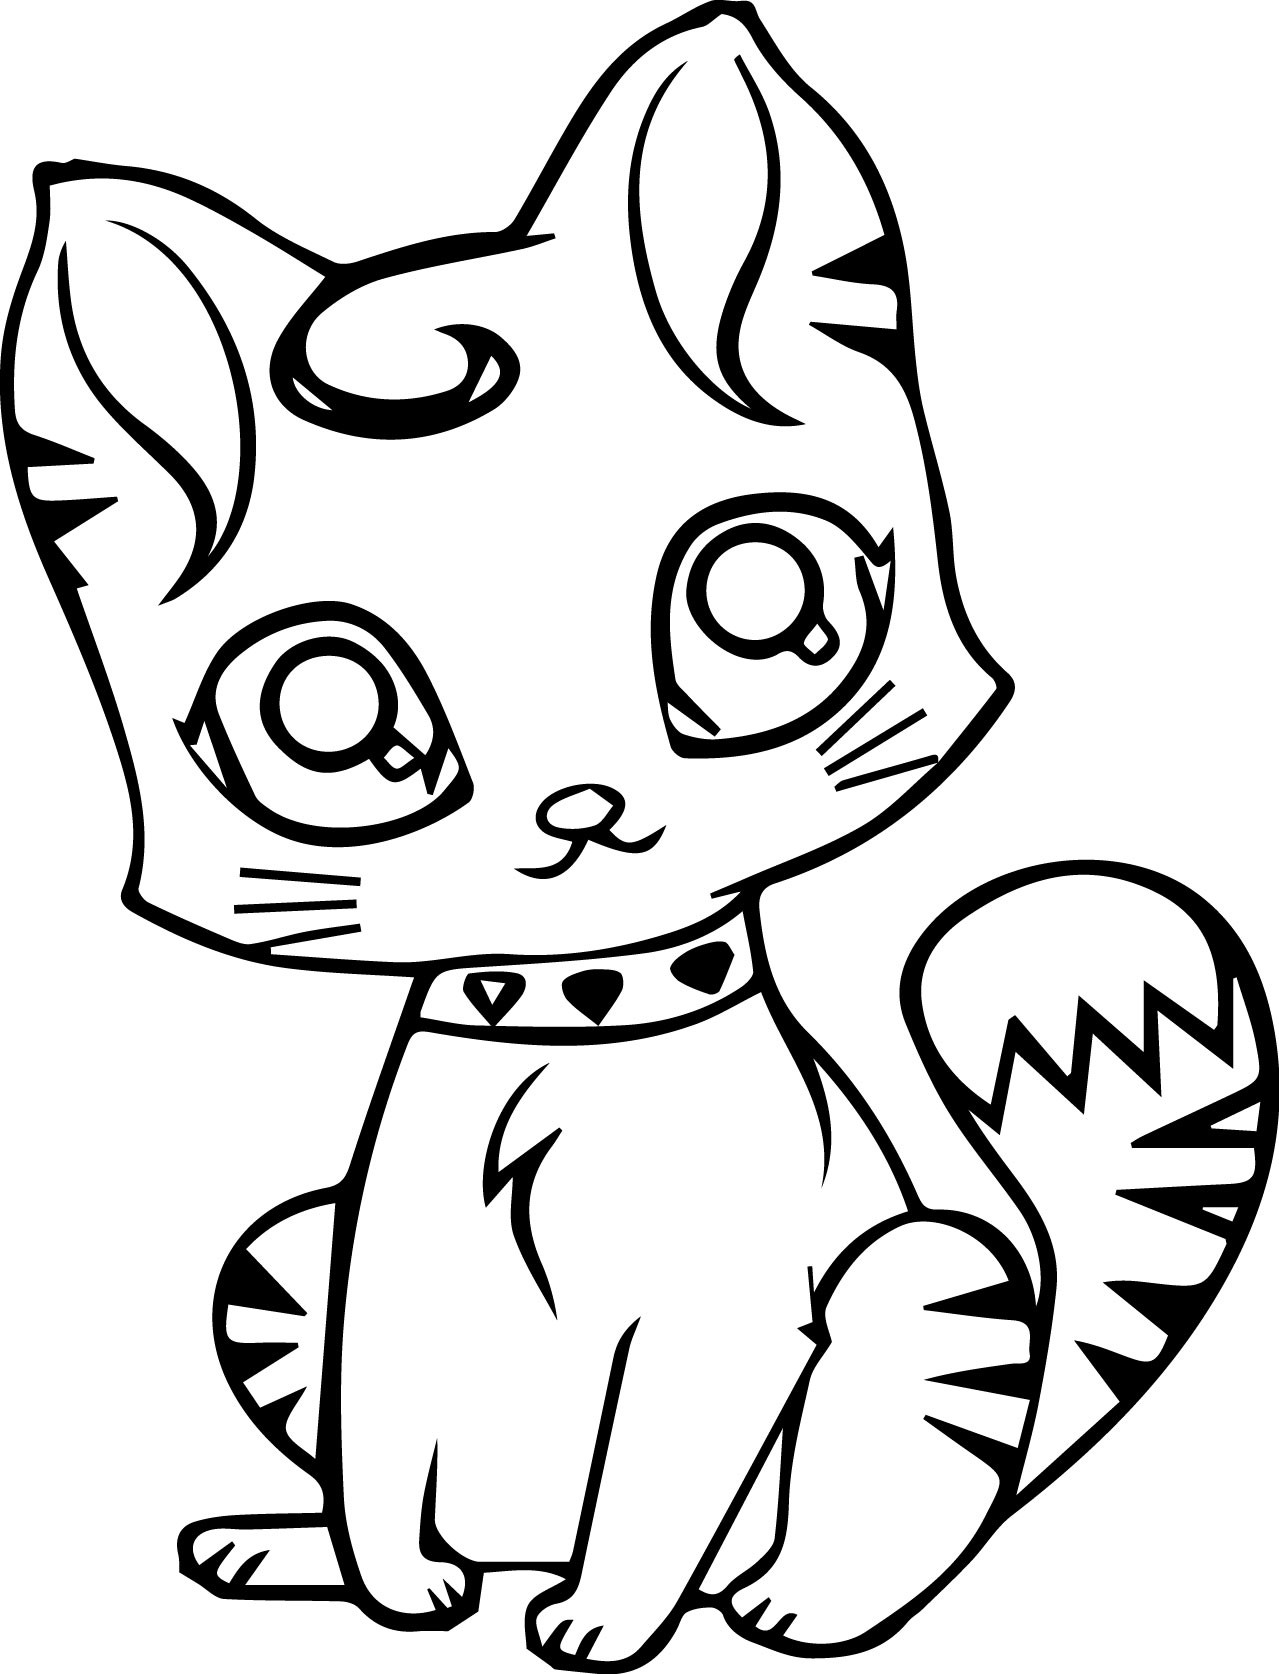 Cat Coloring Pages at GetColorings.com  Free printable colorings pages to print and color